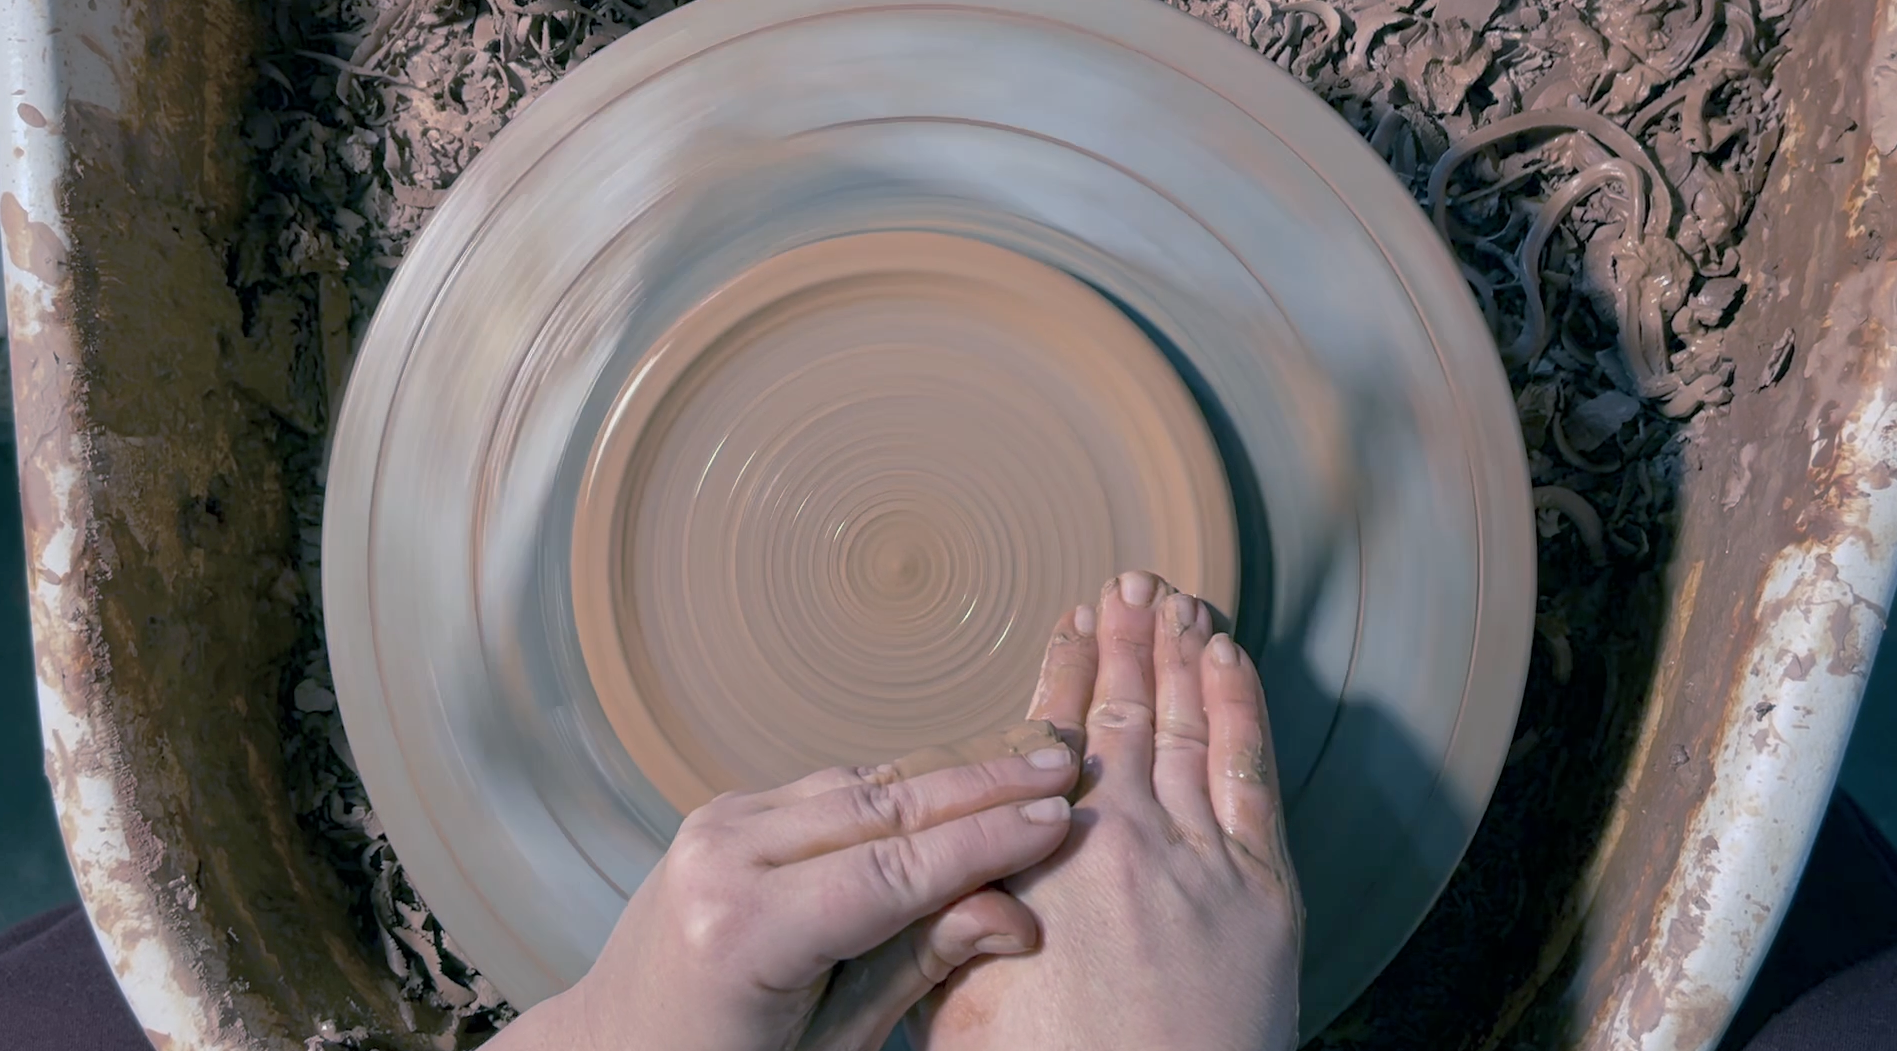 Load video: Video of a handmade ceramic vessel being made on a pottery throwing wheel. We see a lay-down angle of female hands shaping dark red, moist clay while it spins hypnotically on the wheel head making perfect spirals.